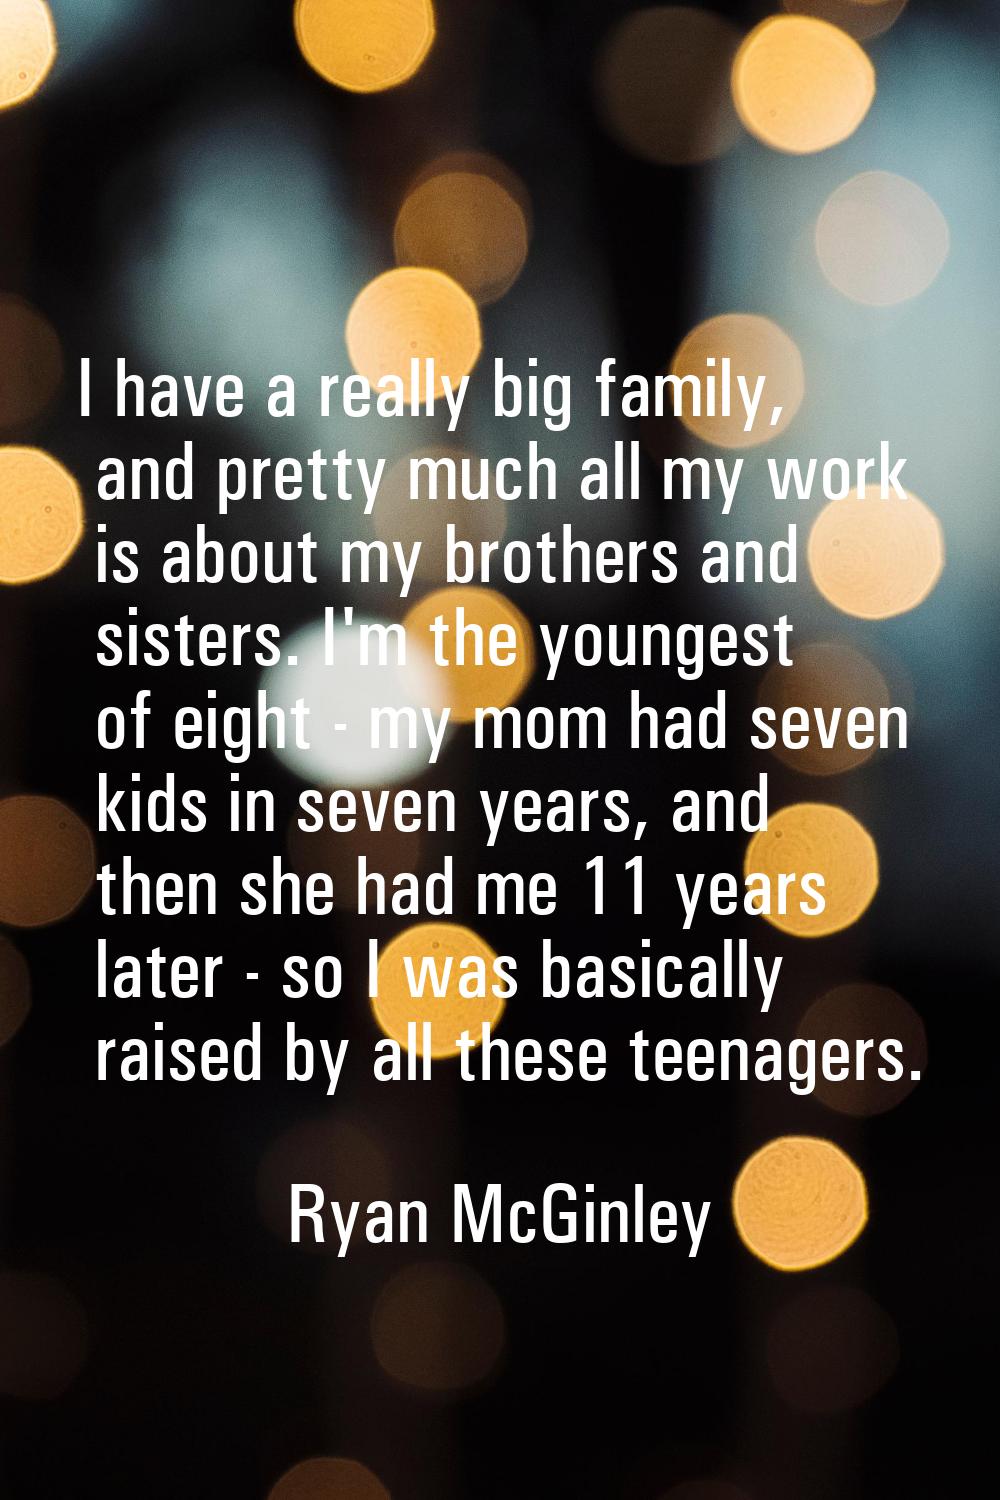 I have a really big family, and pretty much all my work is about my brothers and sisters. I'm the y